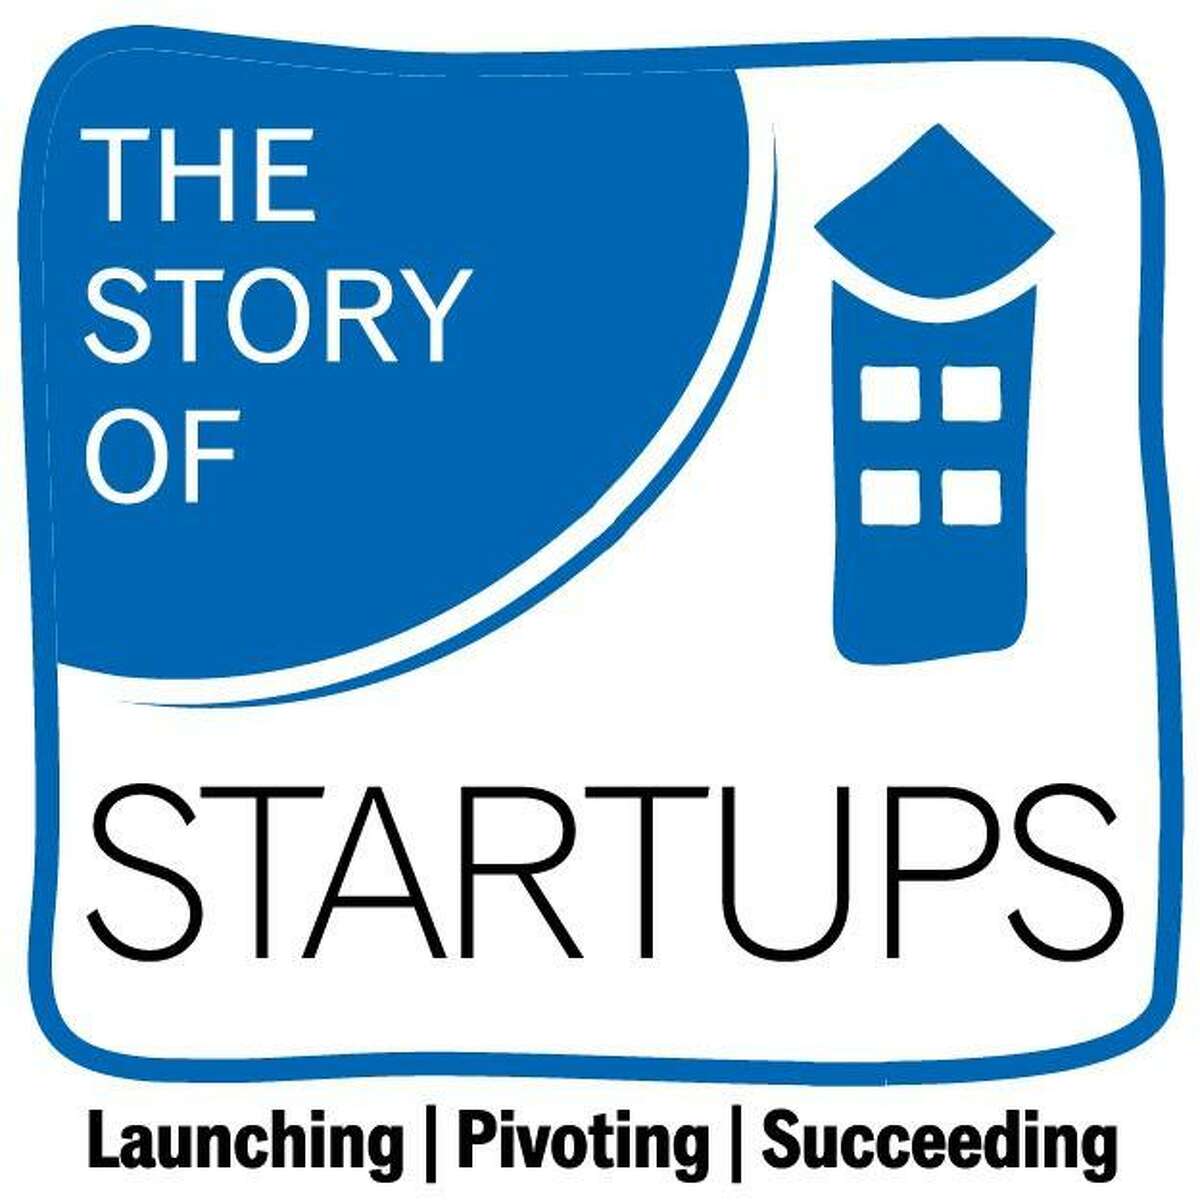 The New Canaan Library, and the New Canaan Chamber of Commerce are presenting the second part of their four-part business series titled: “The Story of Startups,” on Tuesday, February 9, at 7 p.m., via video conference. Sign-in information will be provided to people who registered for the virtual event upon their registration for it at: newcanaanlibrary.org. The series continues with its third part on Tuesday, February 23. The third part of the series is titled: “The Entrepreneurial Mindset.” Pictured is the logo for the series.